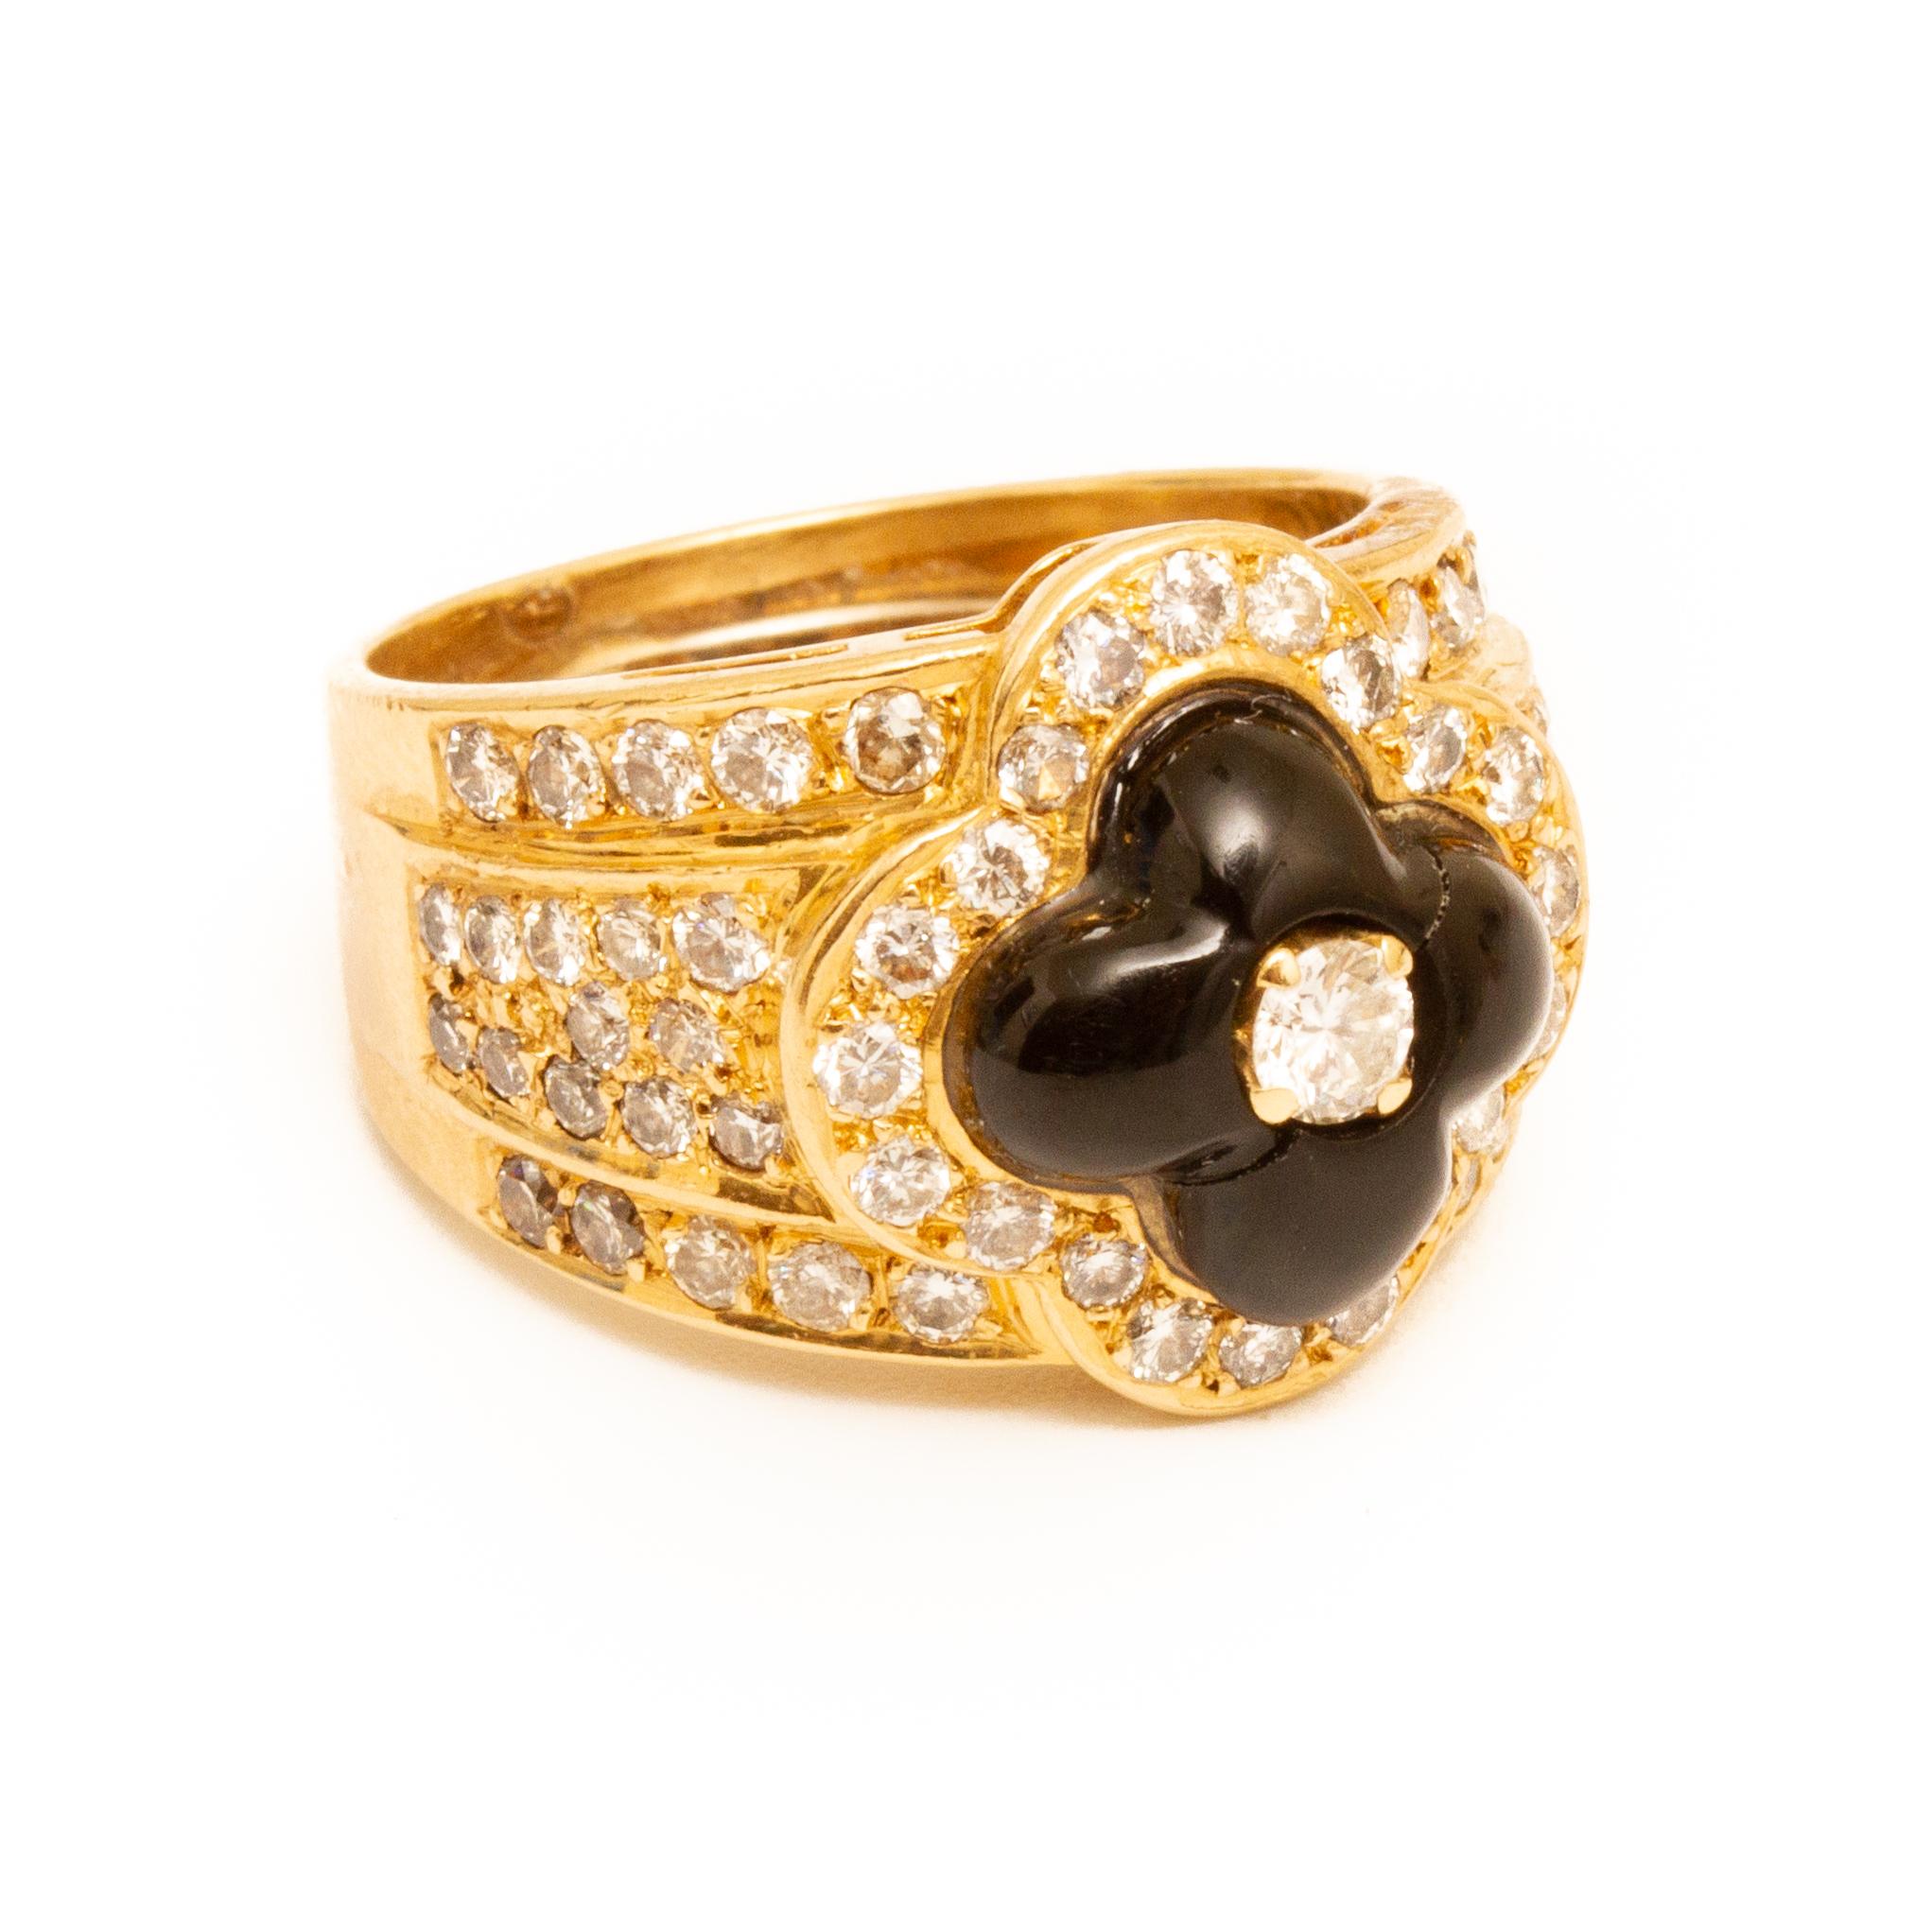 Women's Gold, Black and White Onyx and Diamond Ring